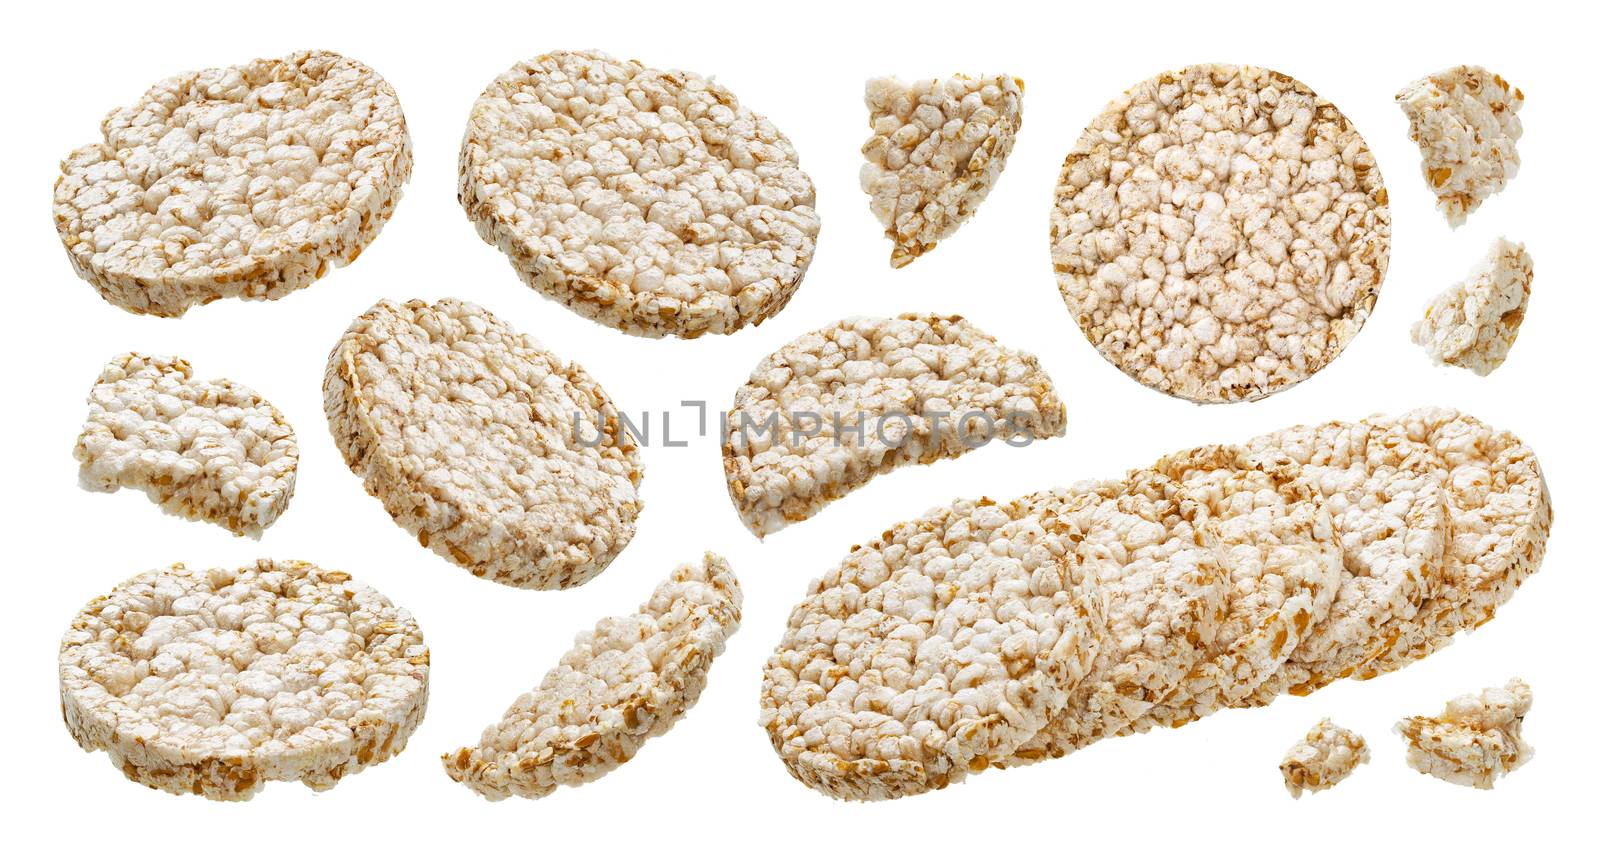 Puffed rice bread isolated on white background, crushed diet crispy round rice waffles